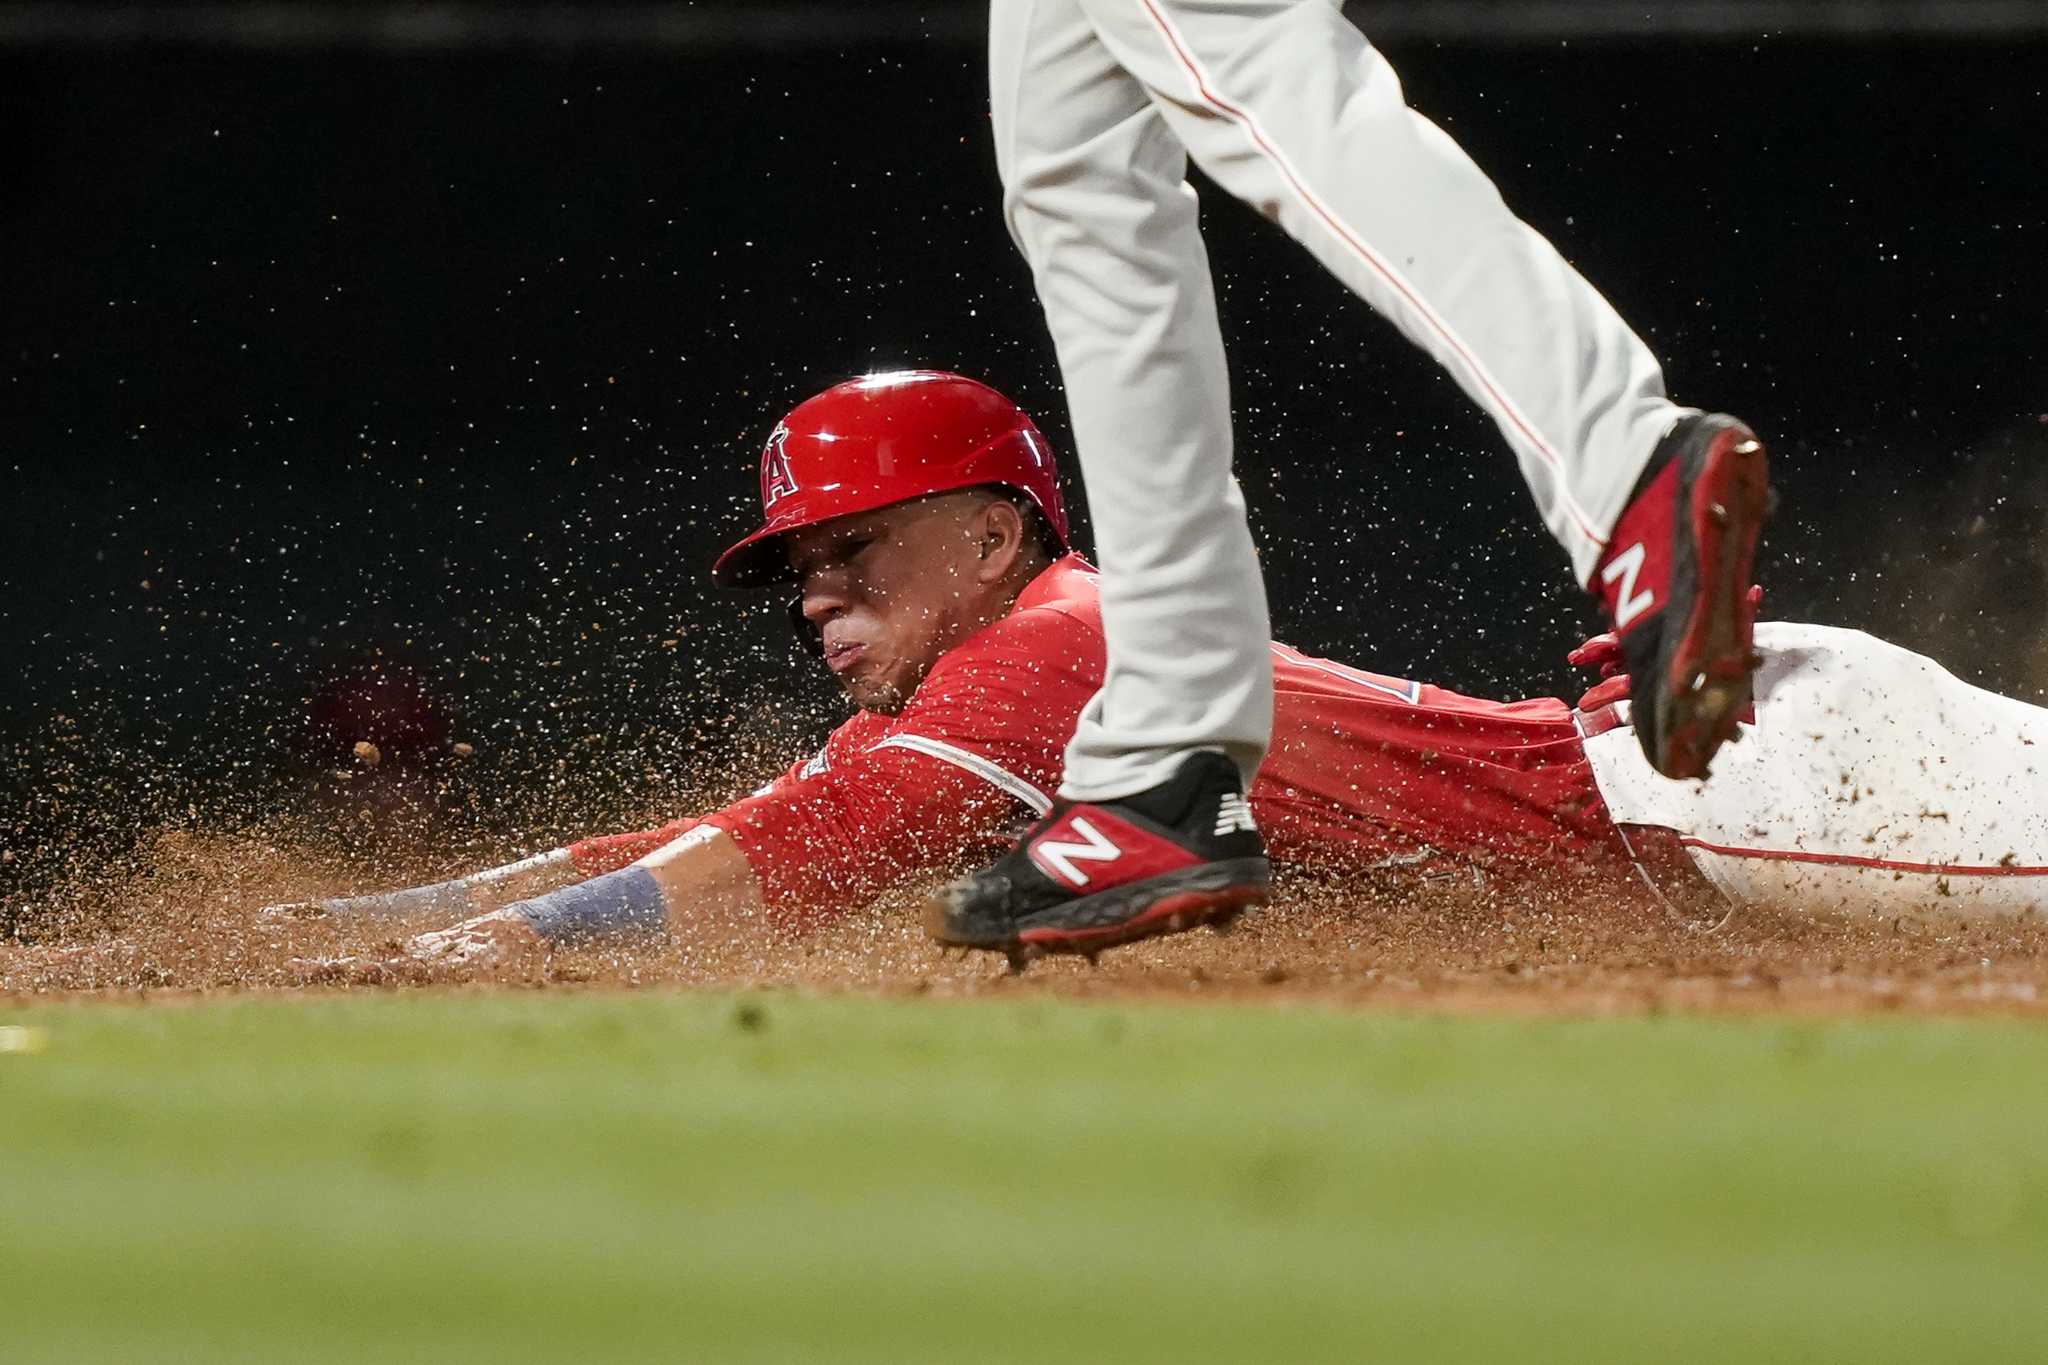 Angels score two on wild pitch and throwing error, beat Phillies 6-5 and snap 4-game skid